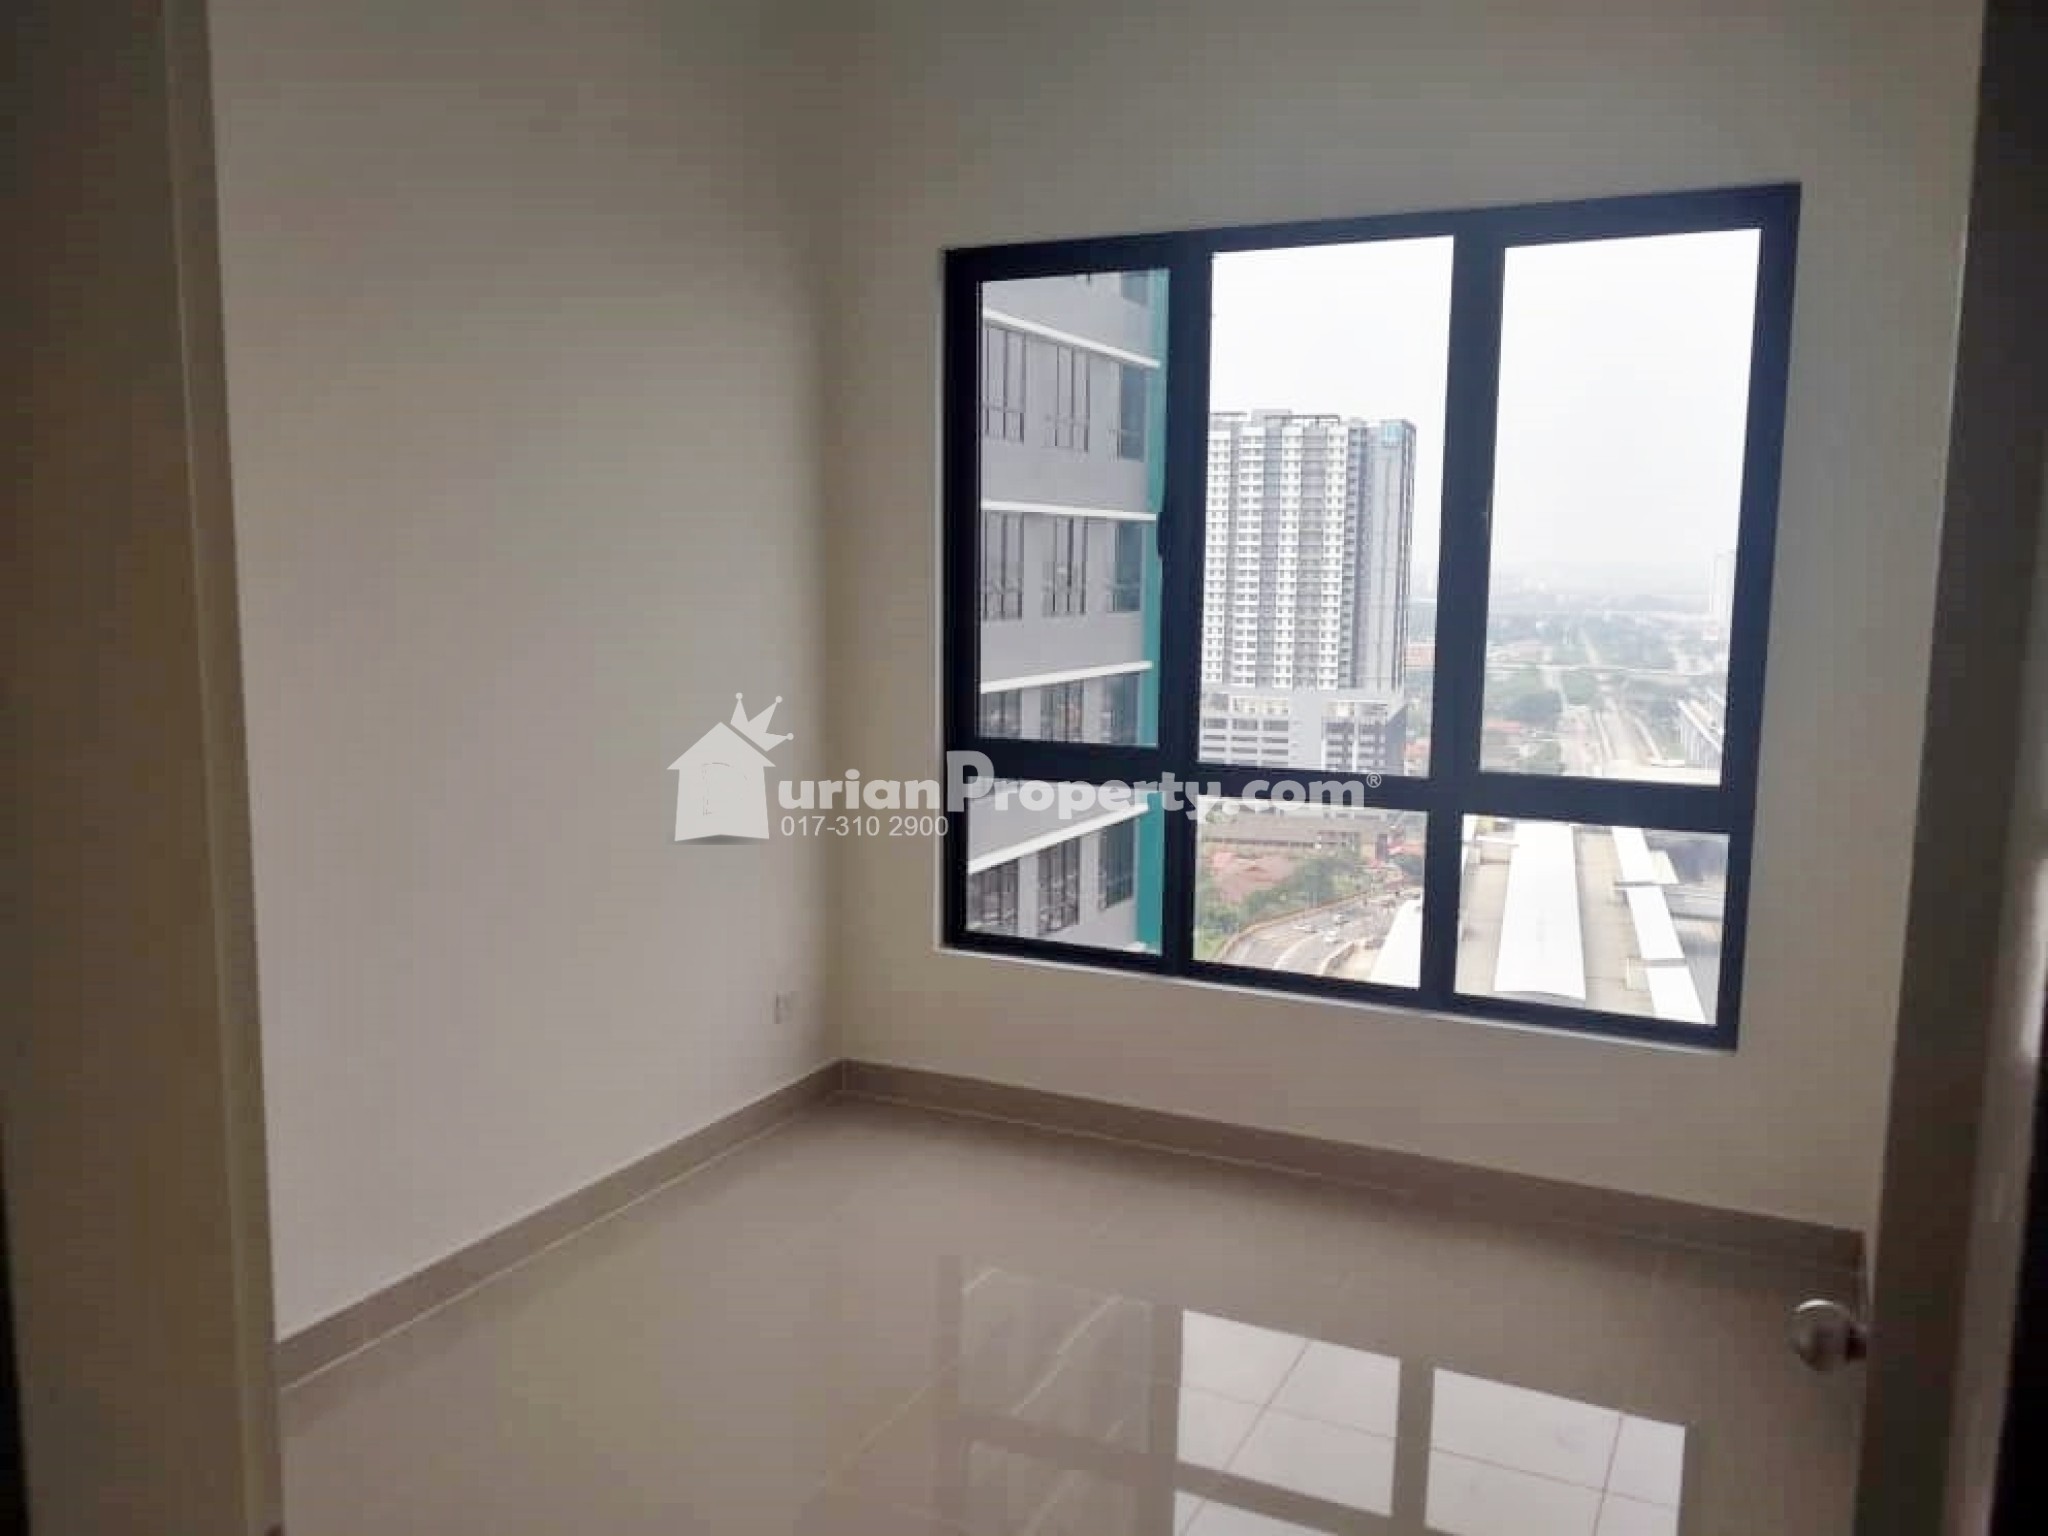 Condo For Rent at MKH boulevard